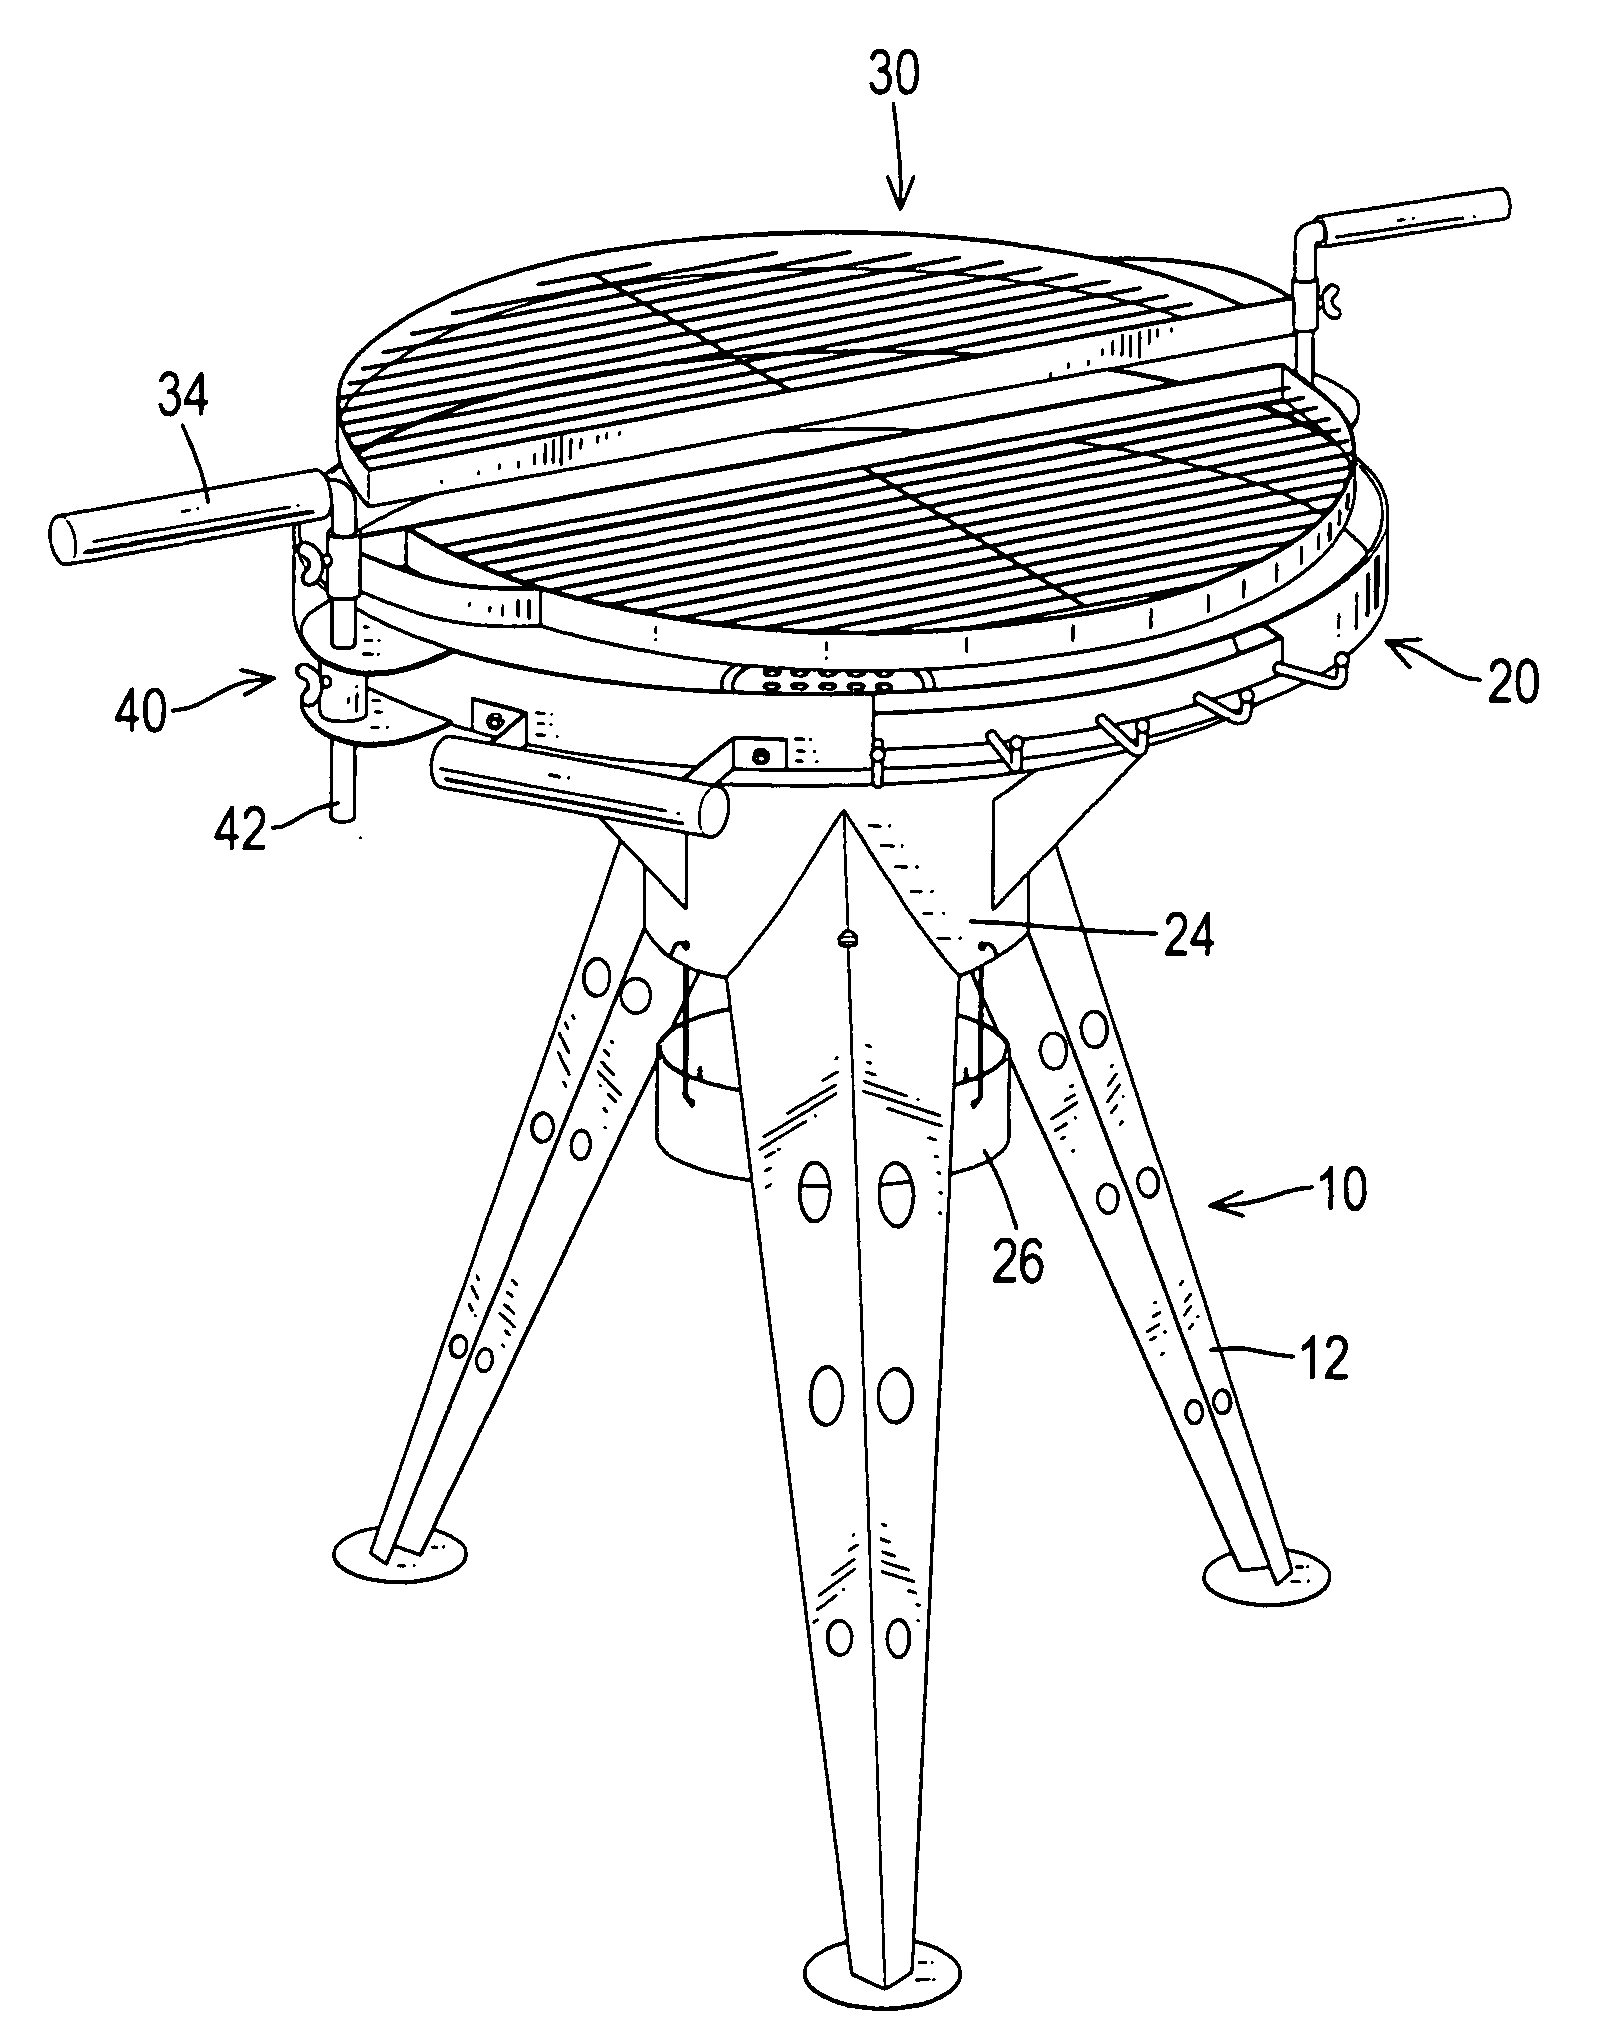 Barbecue grill with multiple adjustable grids